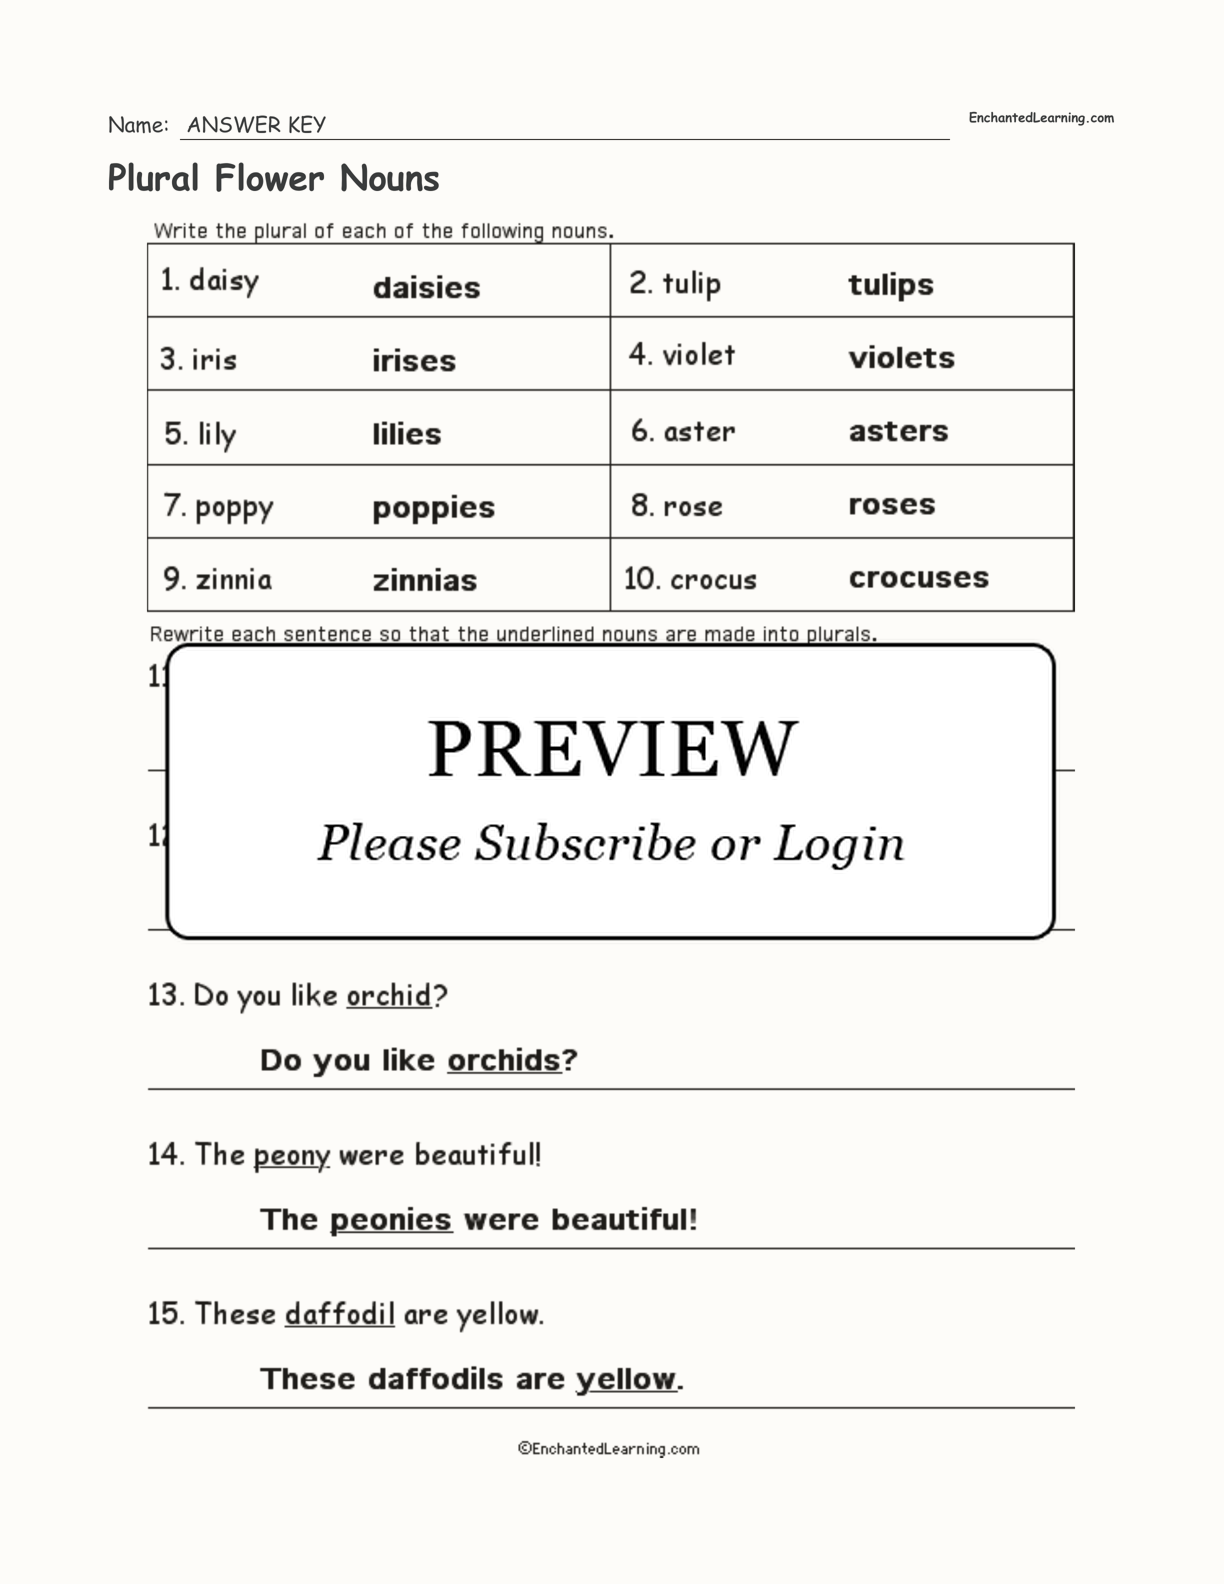 Plural Flower Nouns interactive worksheet page 2